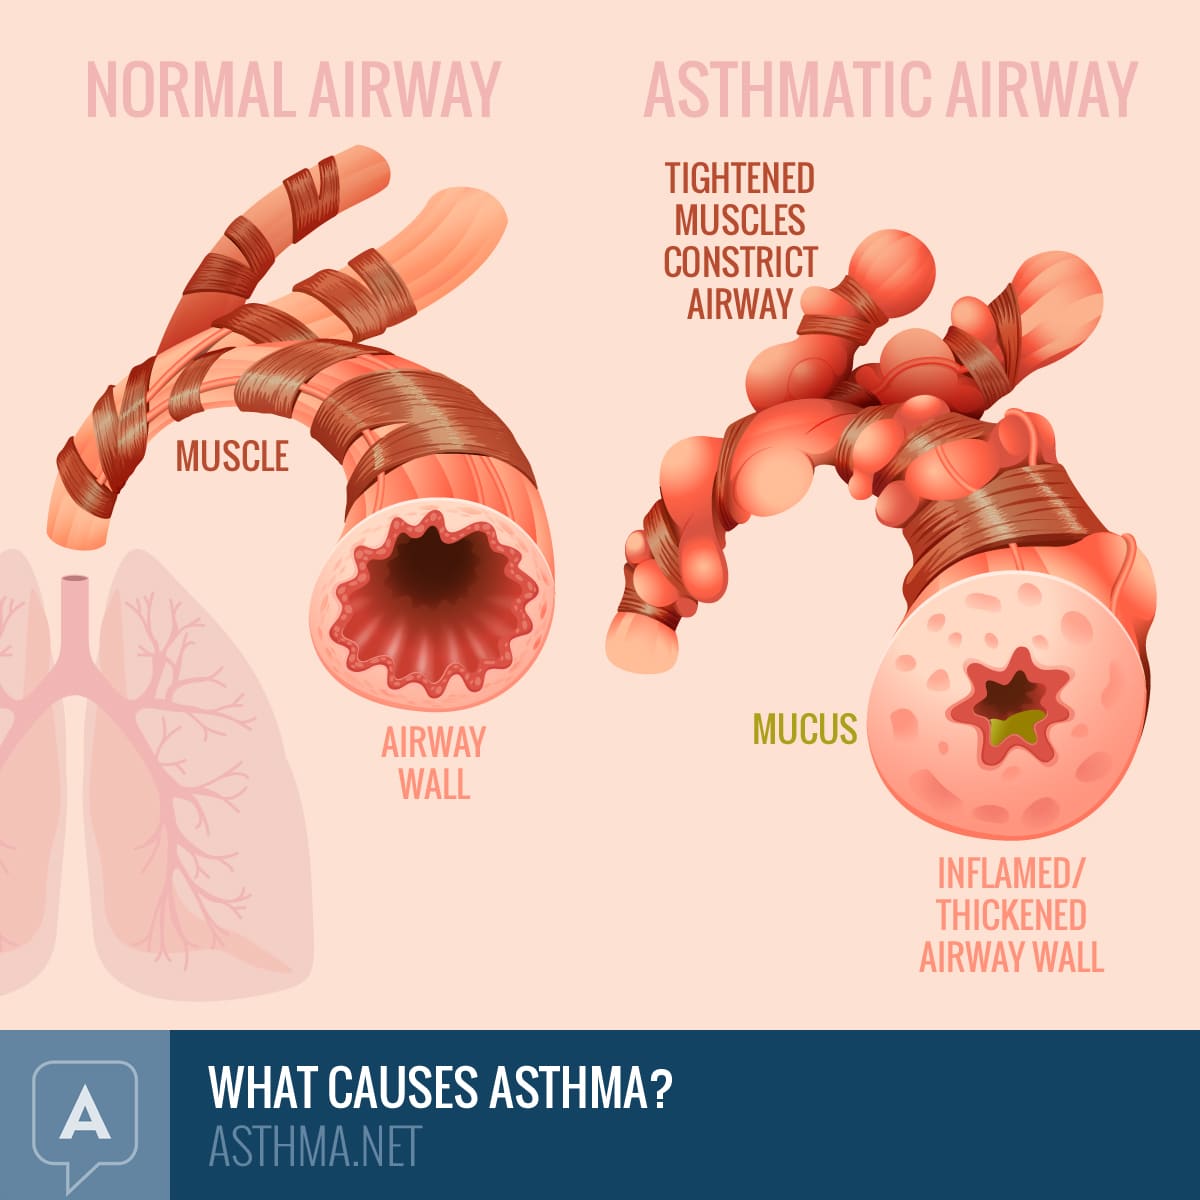 What Causes Asthma: Inflammation and Airway Narrowing